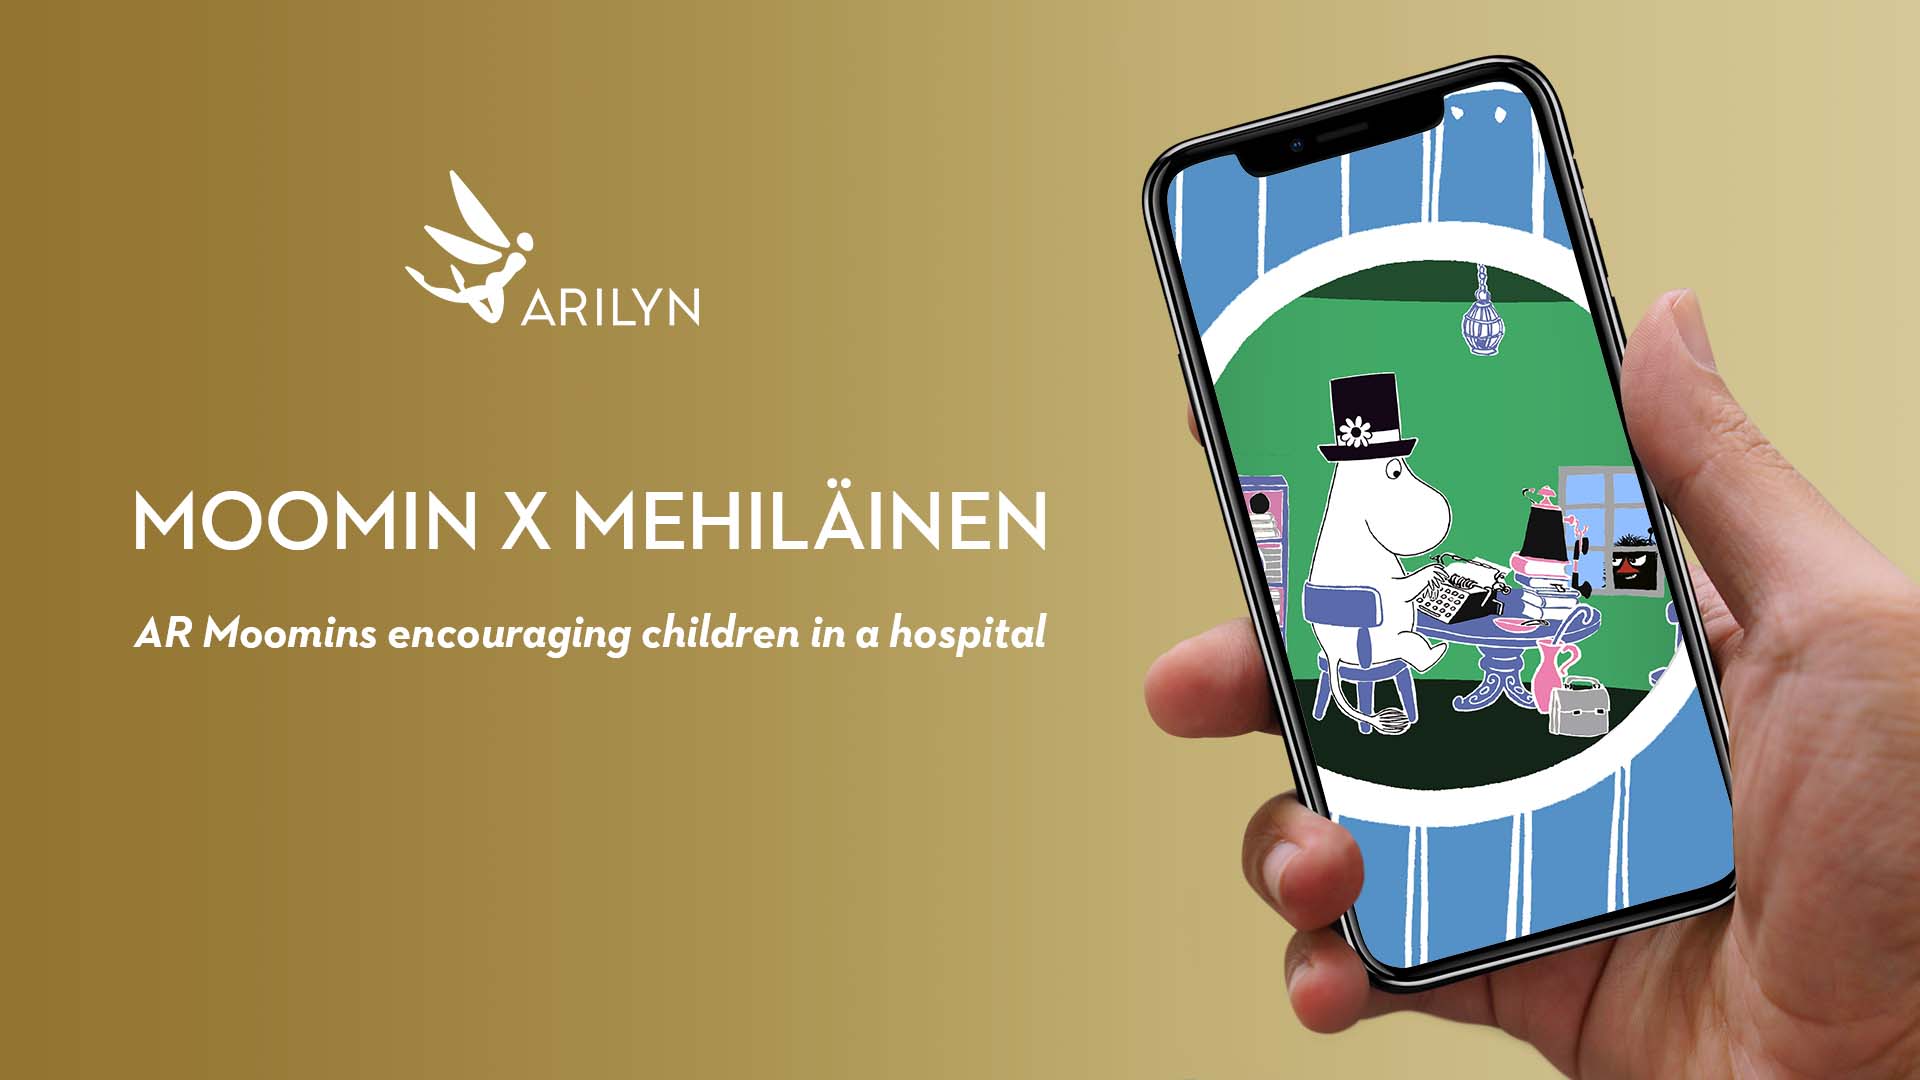 Augmented Moomins courage children at hospitals